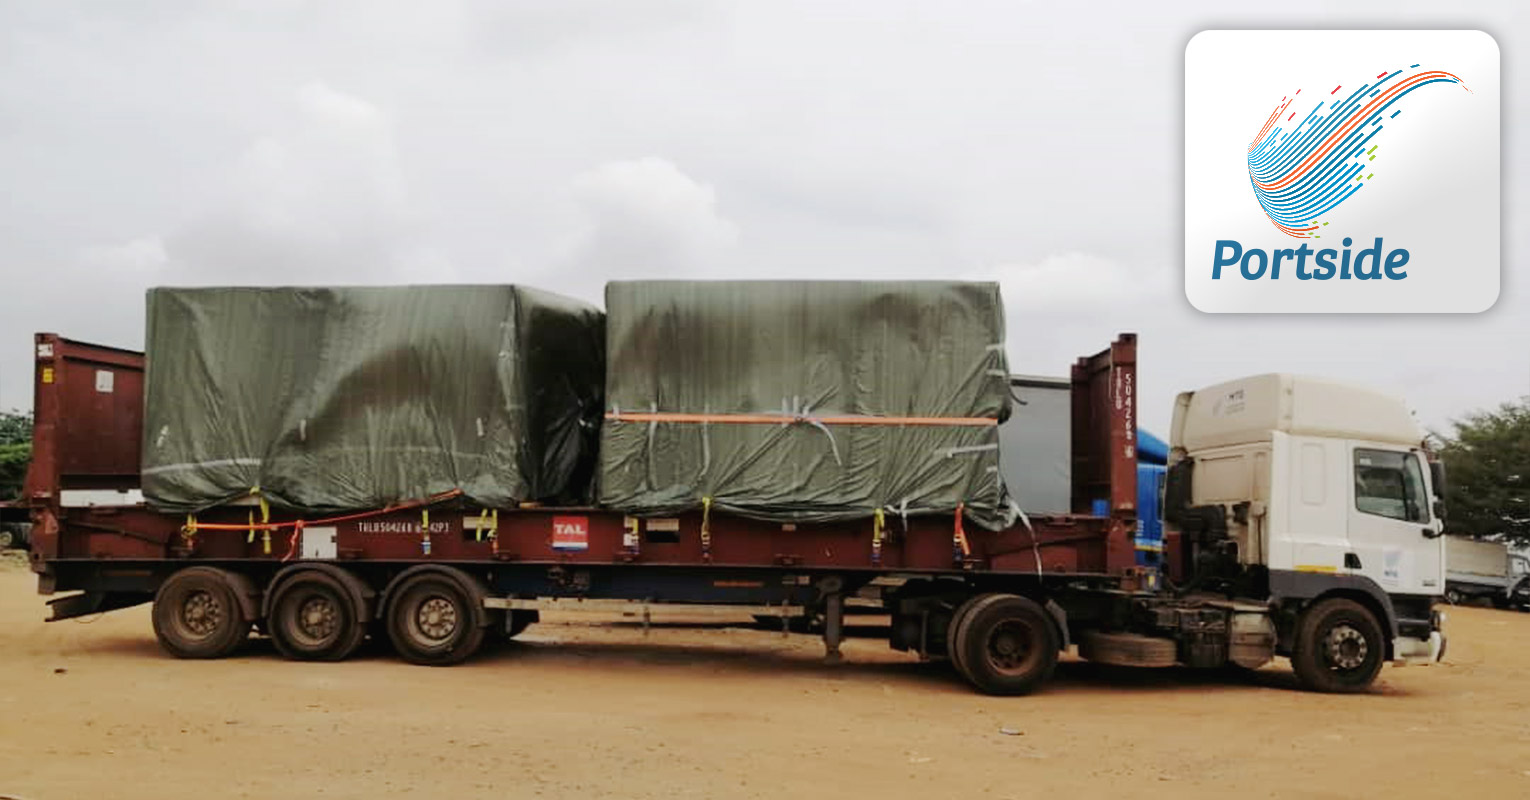 Portside Ghana Handled a Shipment Together with Scan Global Logistics for the UN